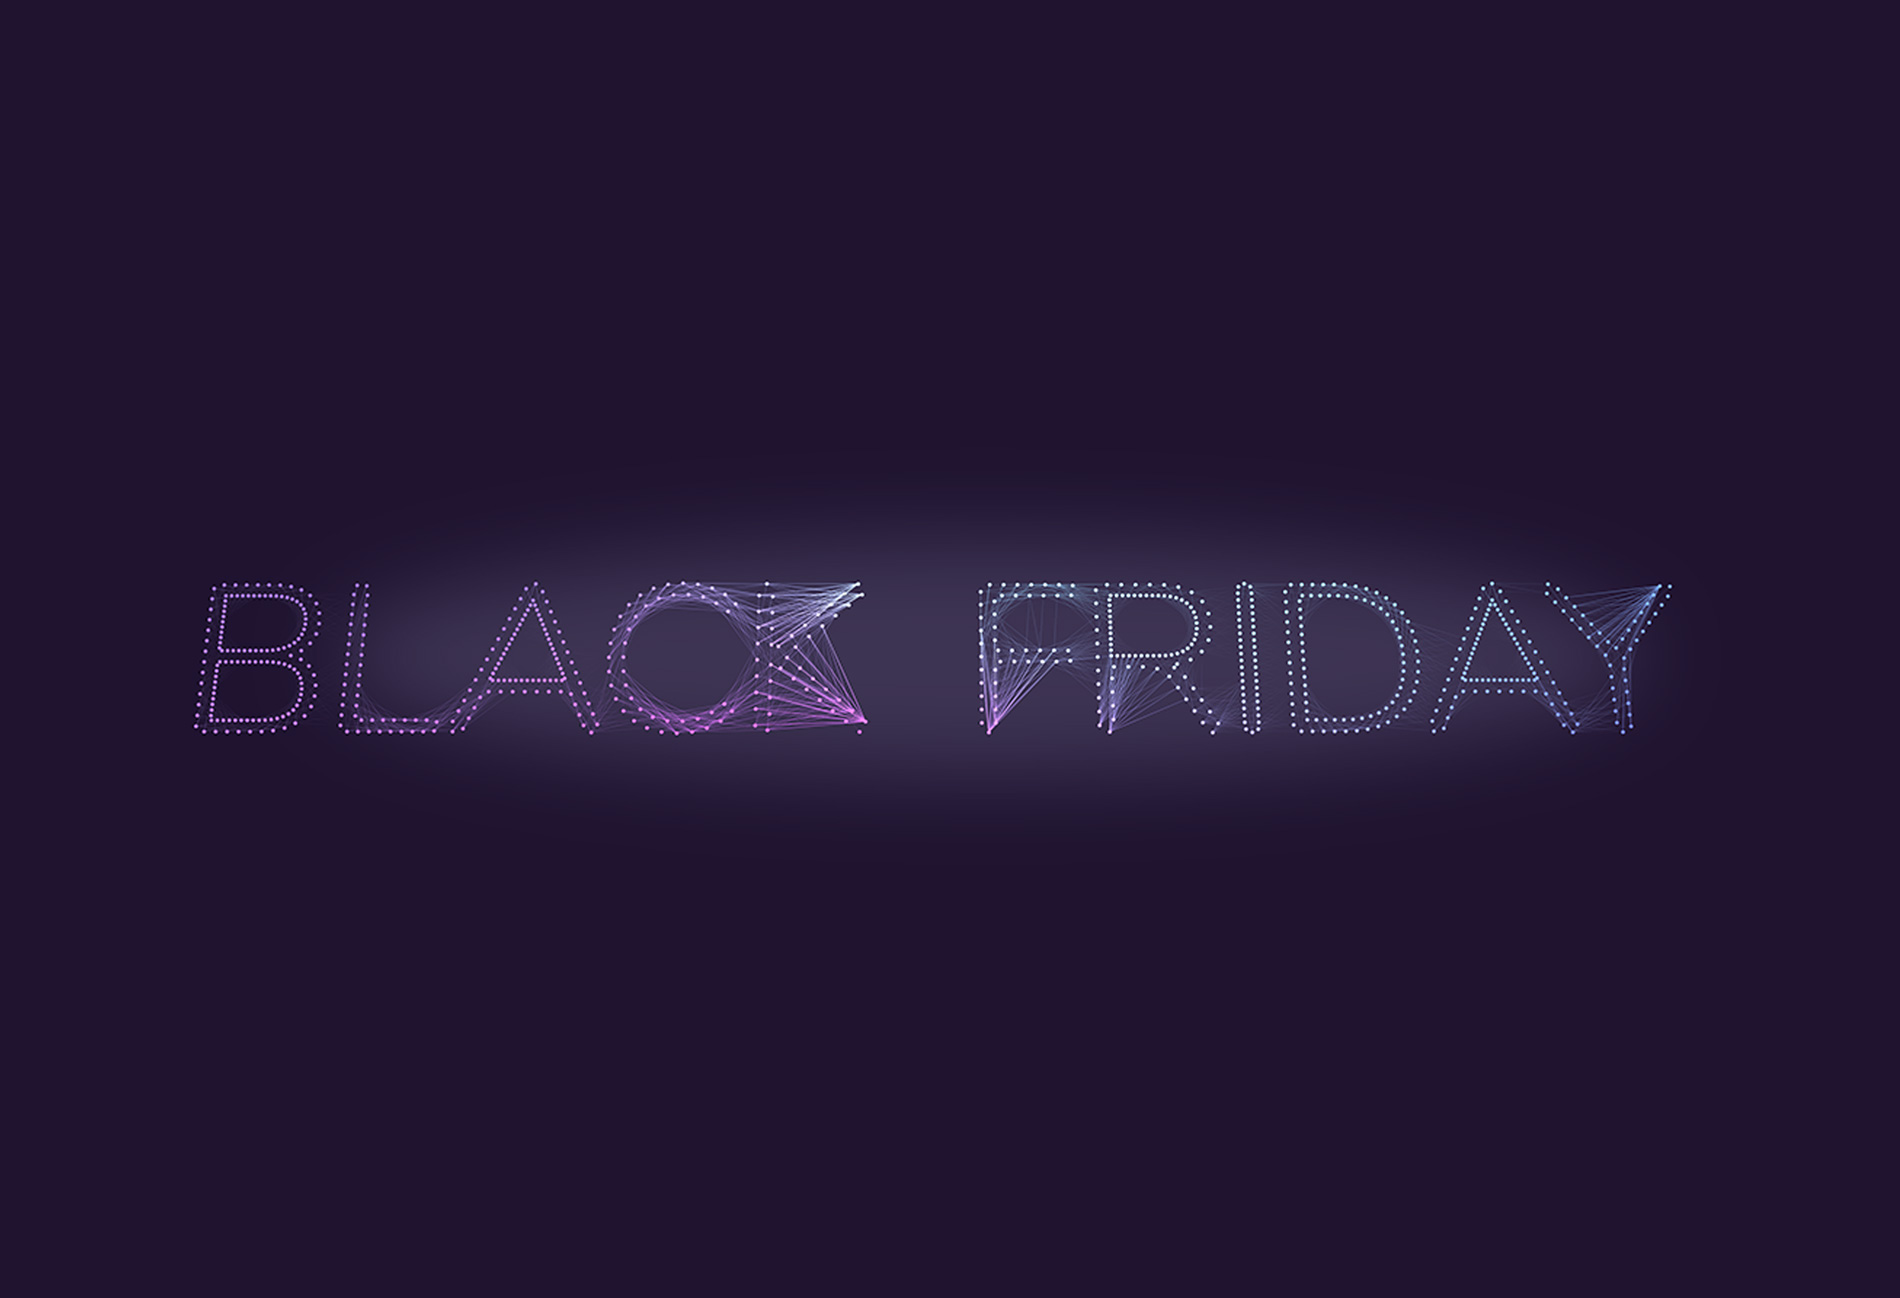 Black Friday Campaign 4